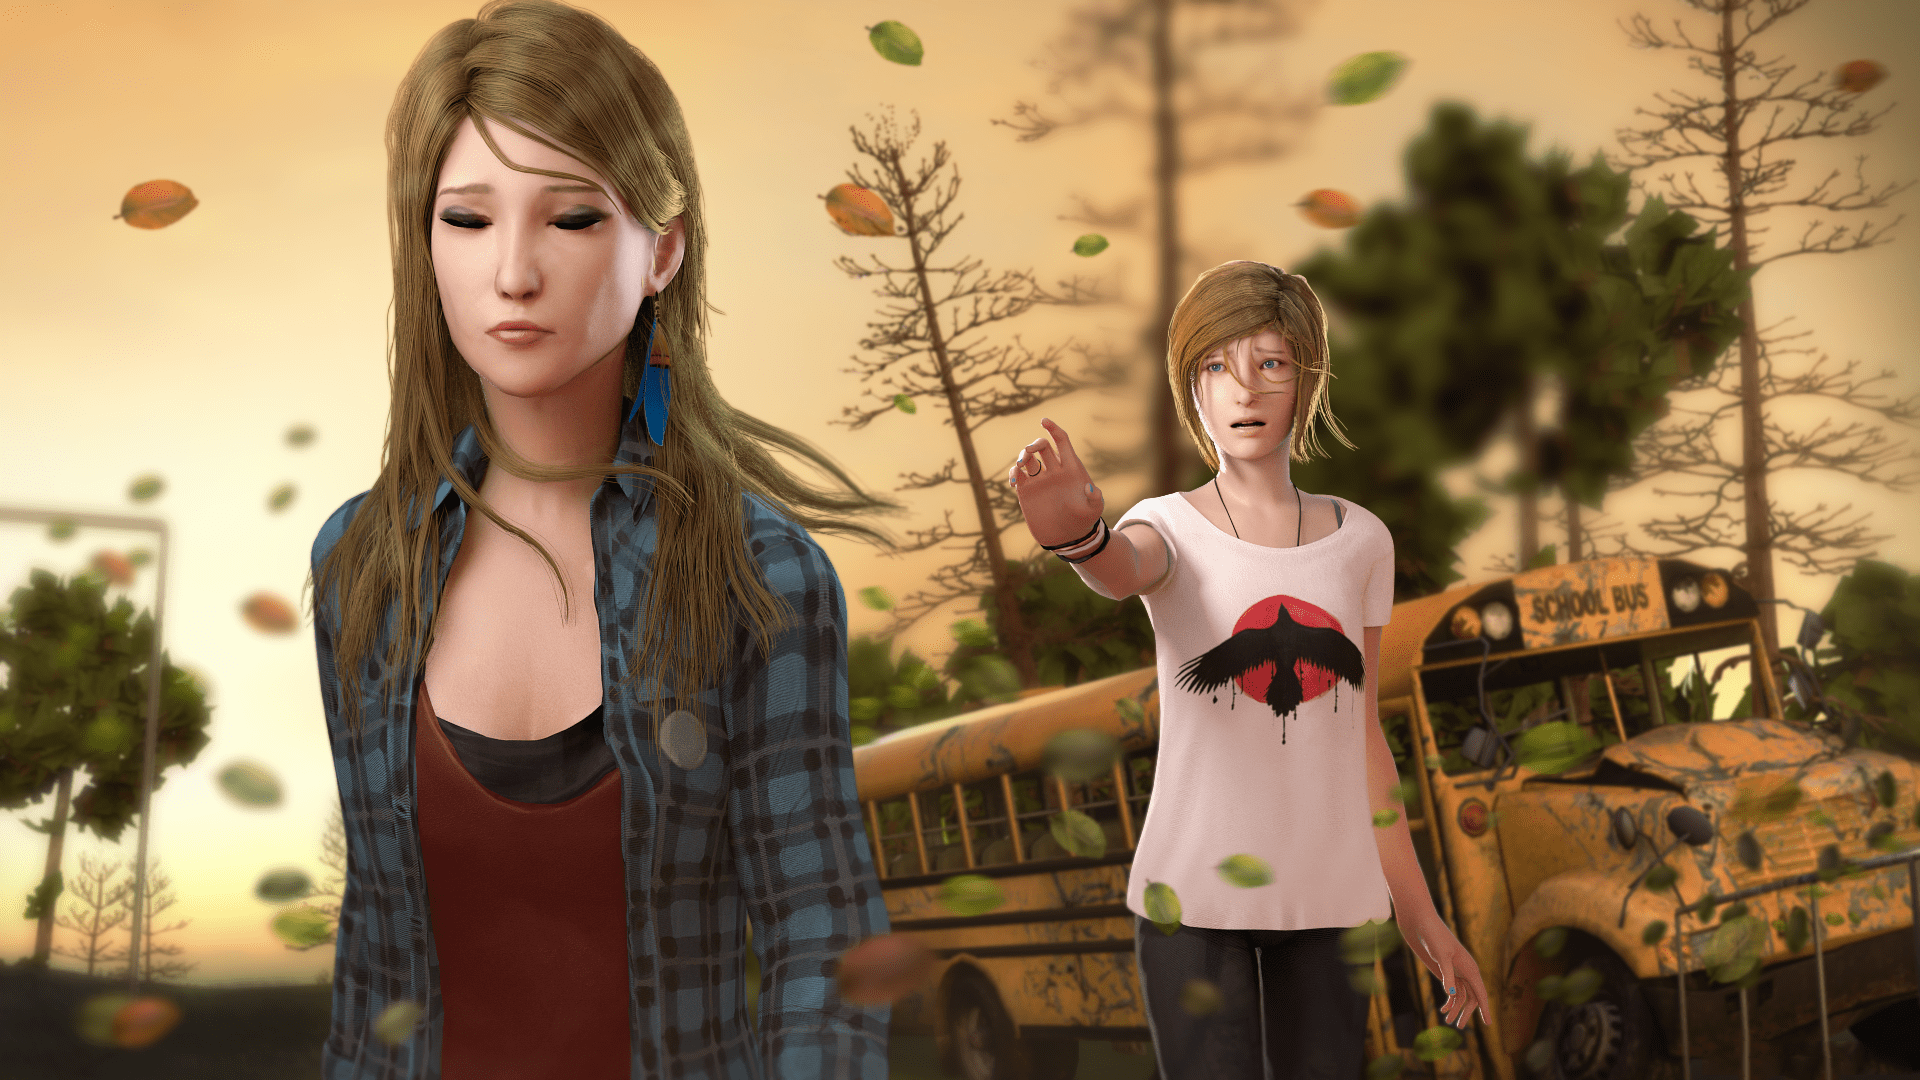 Life is increase. Life is Strange: before the Storm.